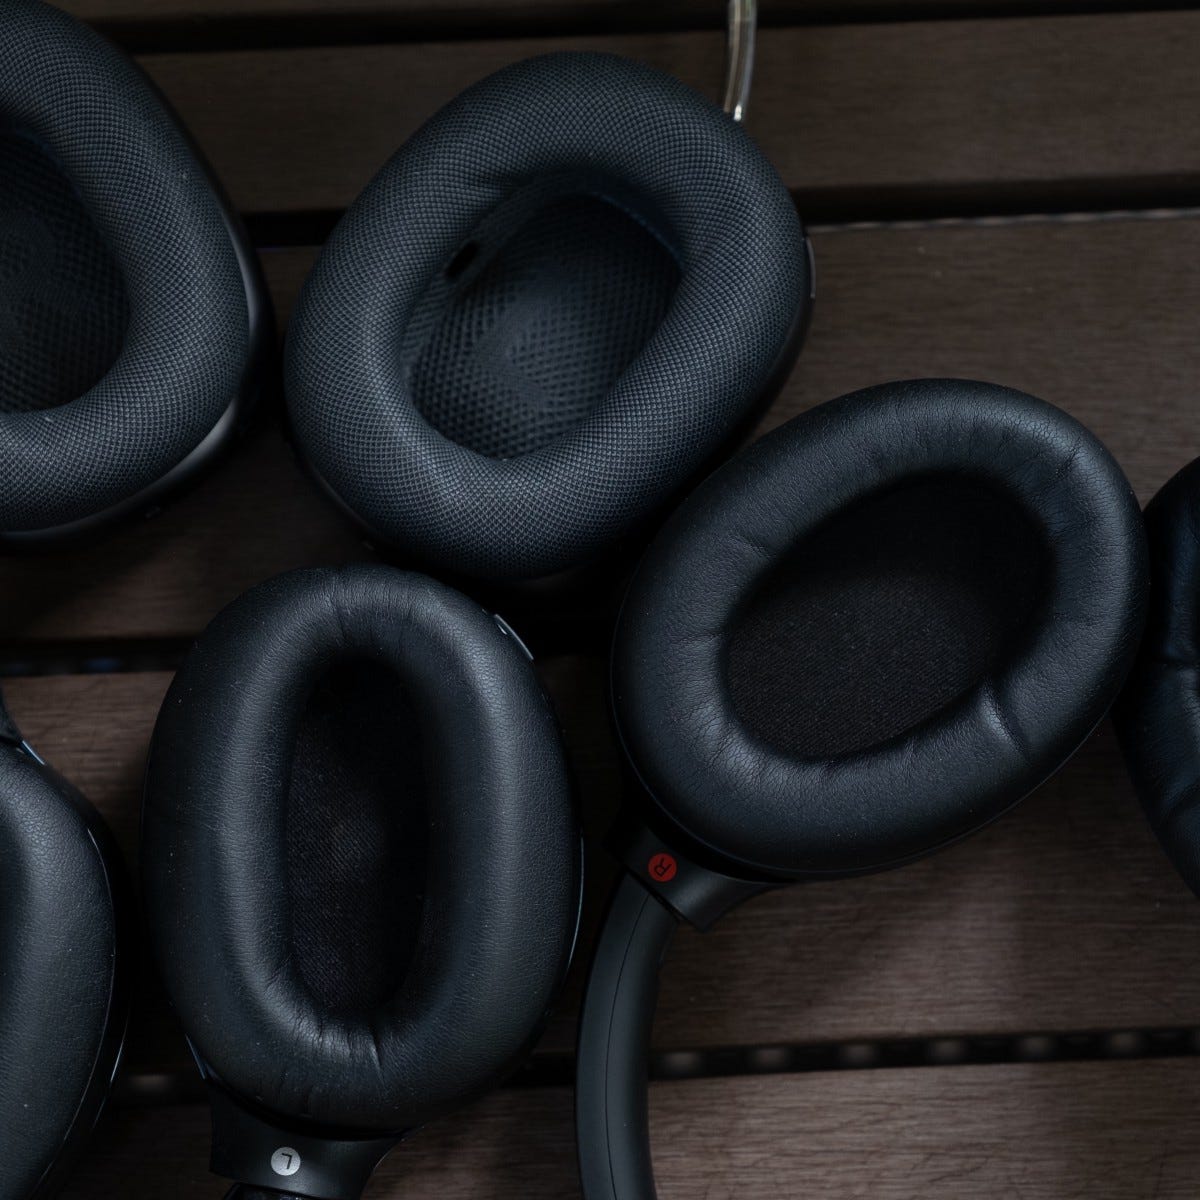 Sony launches 'Silent White' WH-1000XM4 headphones because the black void  of space is too loud - The Verge